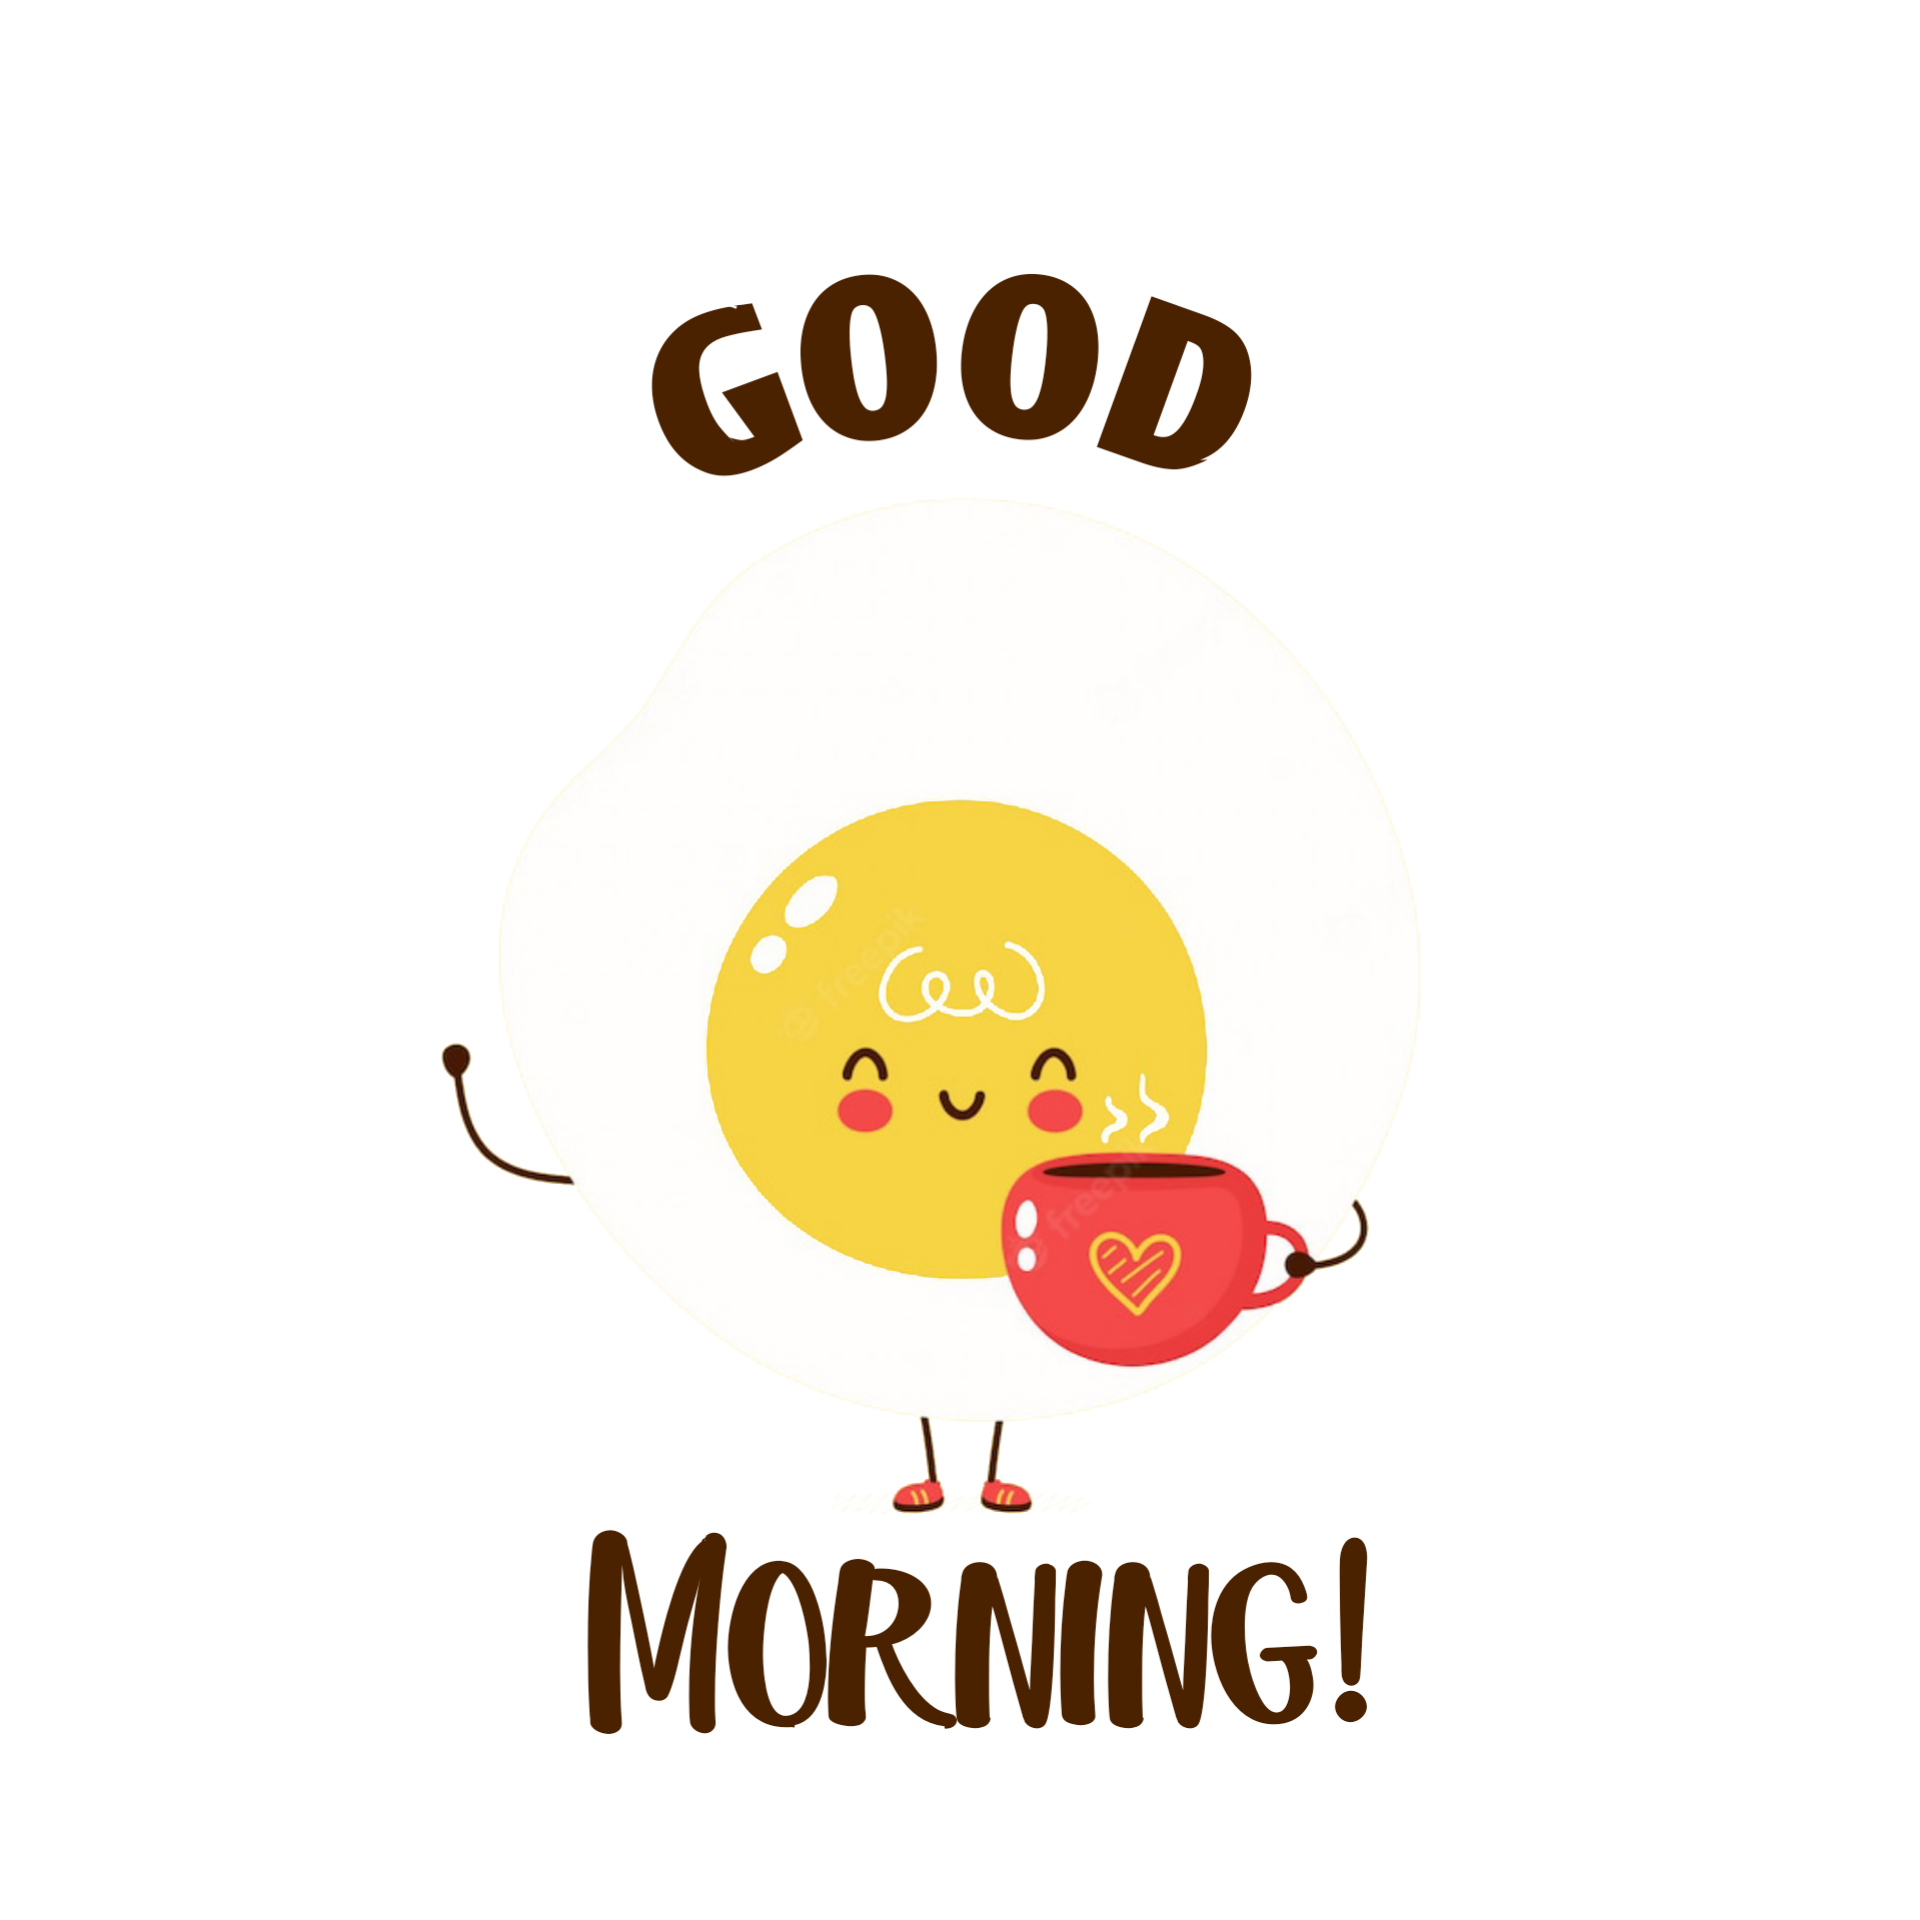 good-morning-pngfre-17